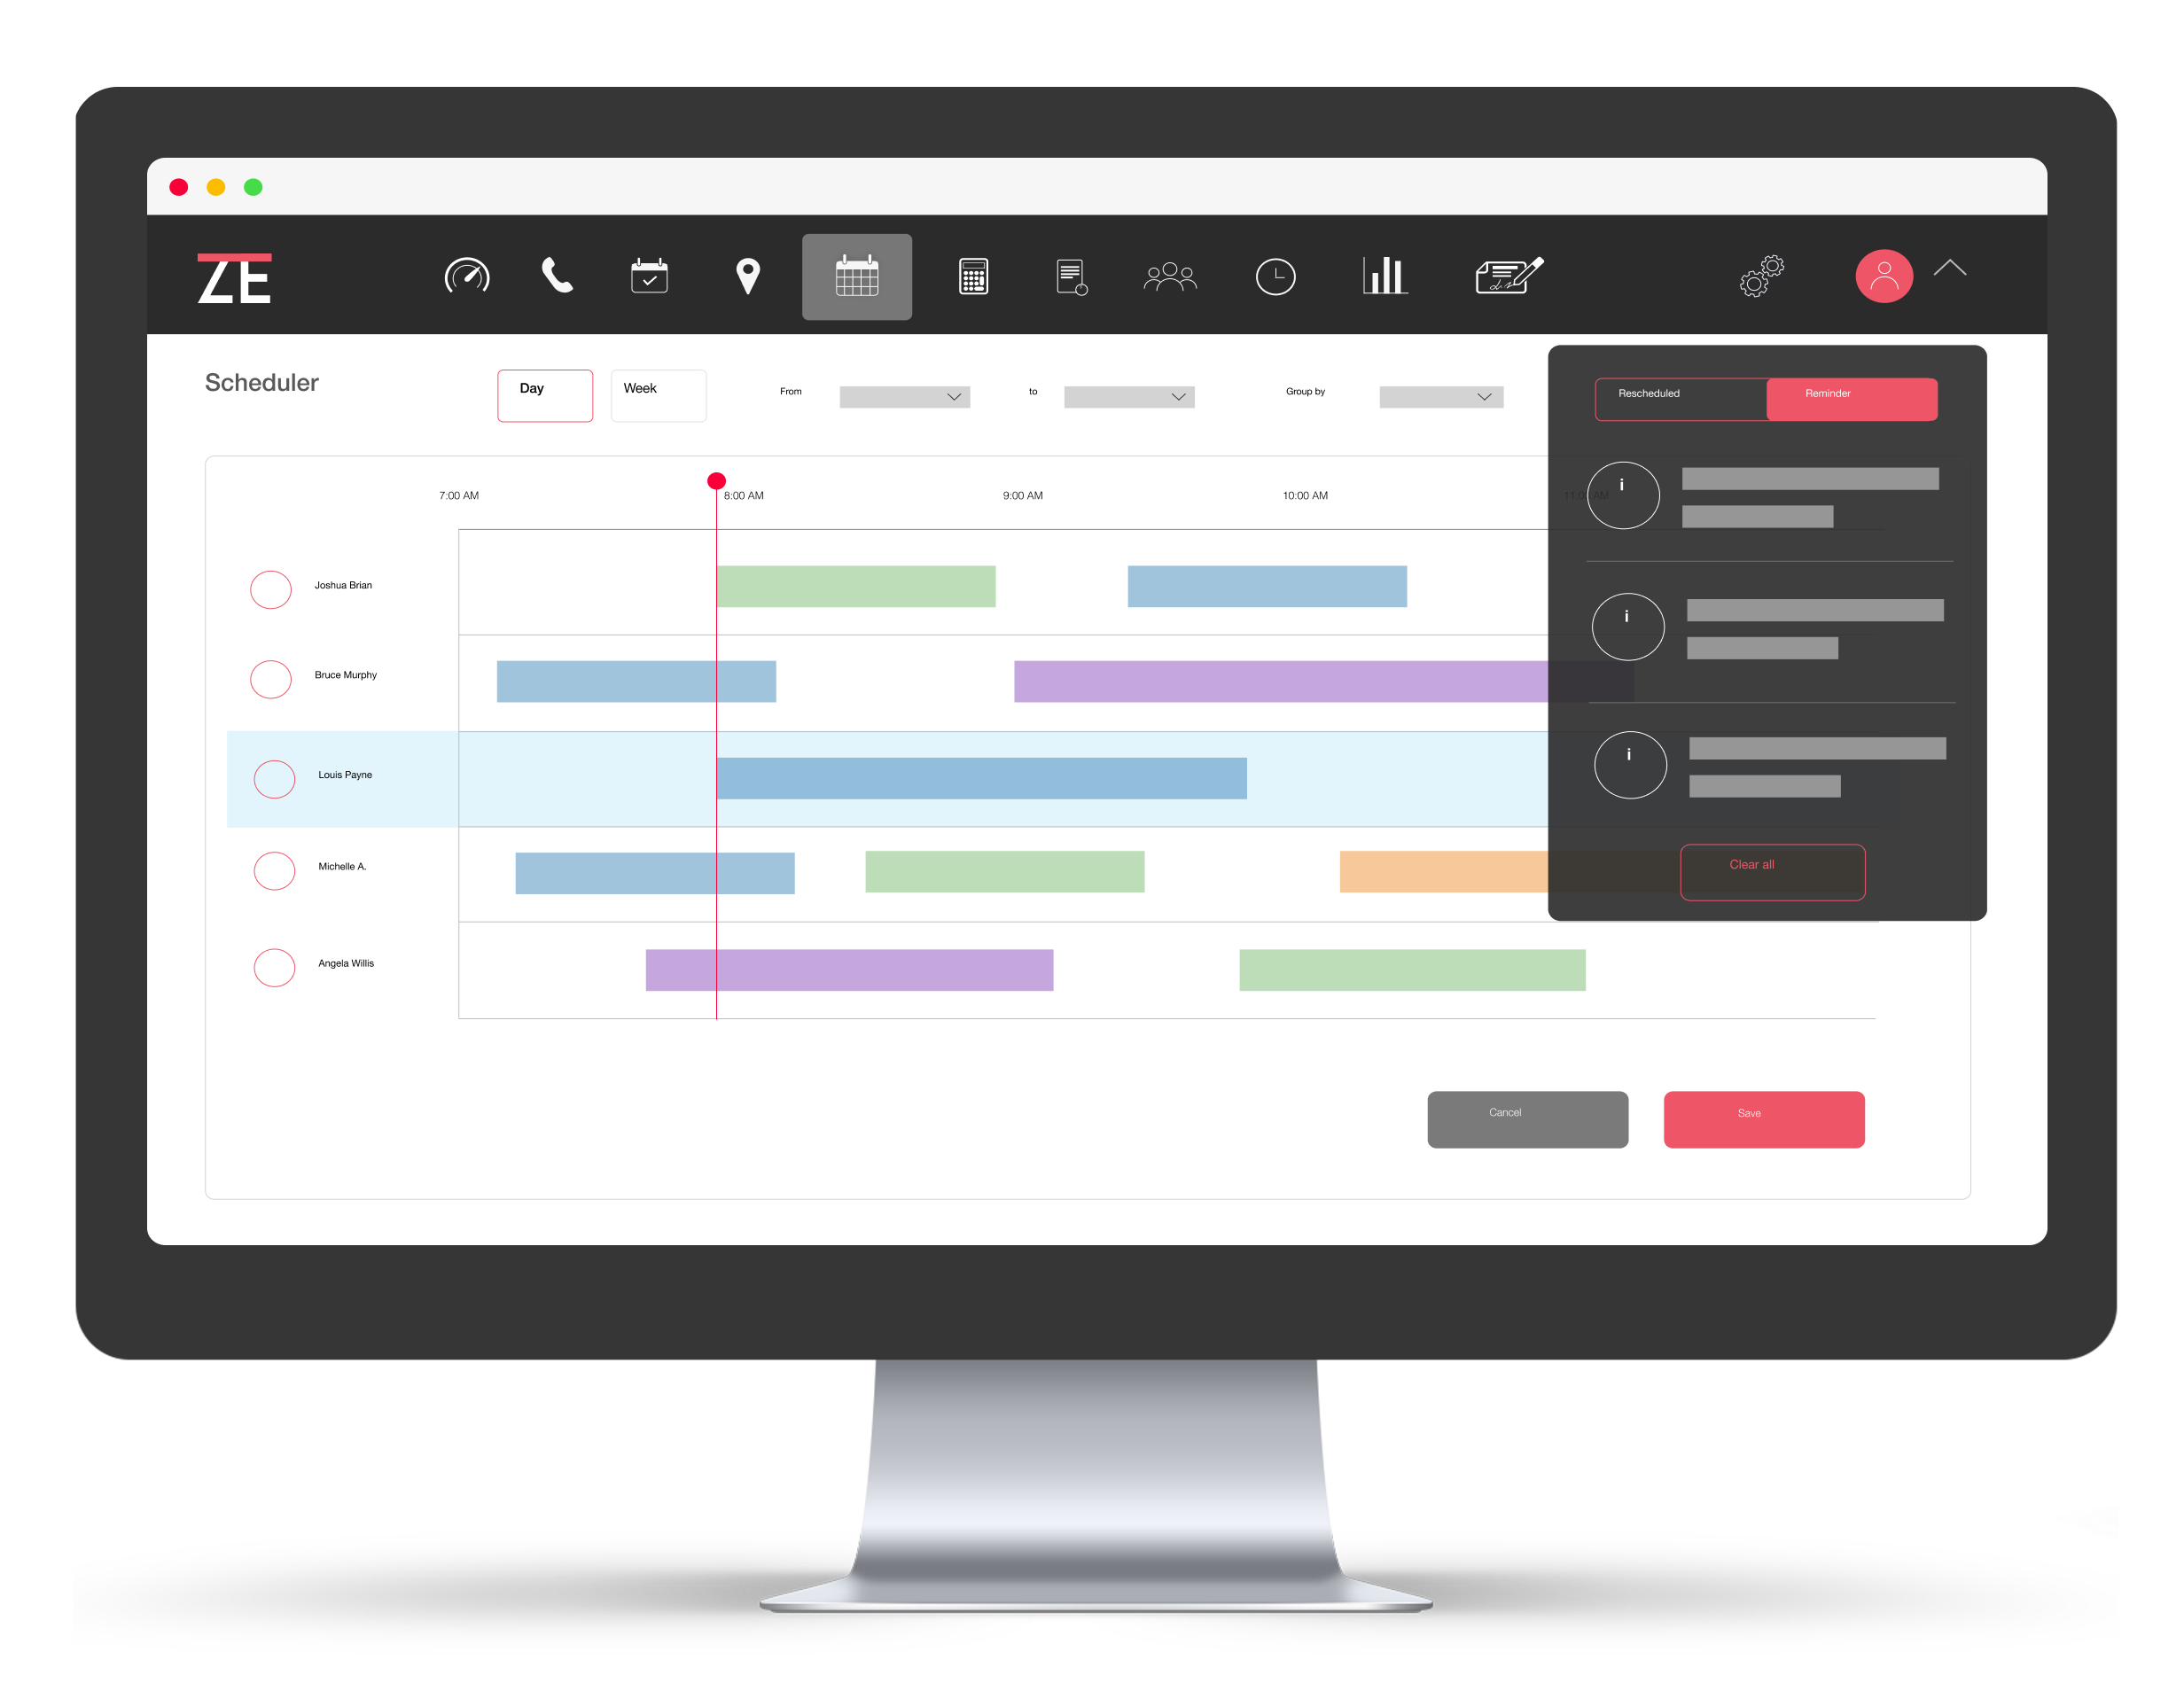 Scheduling
With ZenElectrical’s scheduling software, streamline your scheduling process, and increase your productivity and business profitability.